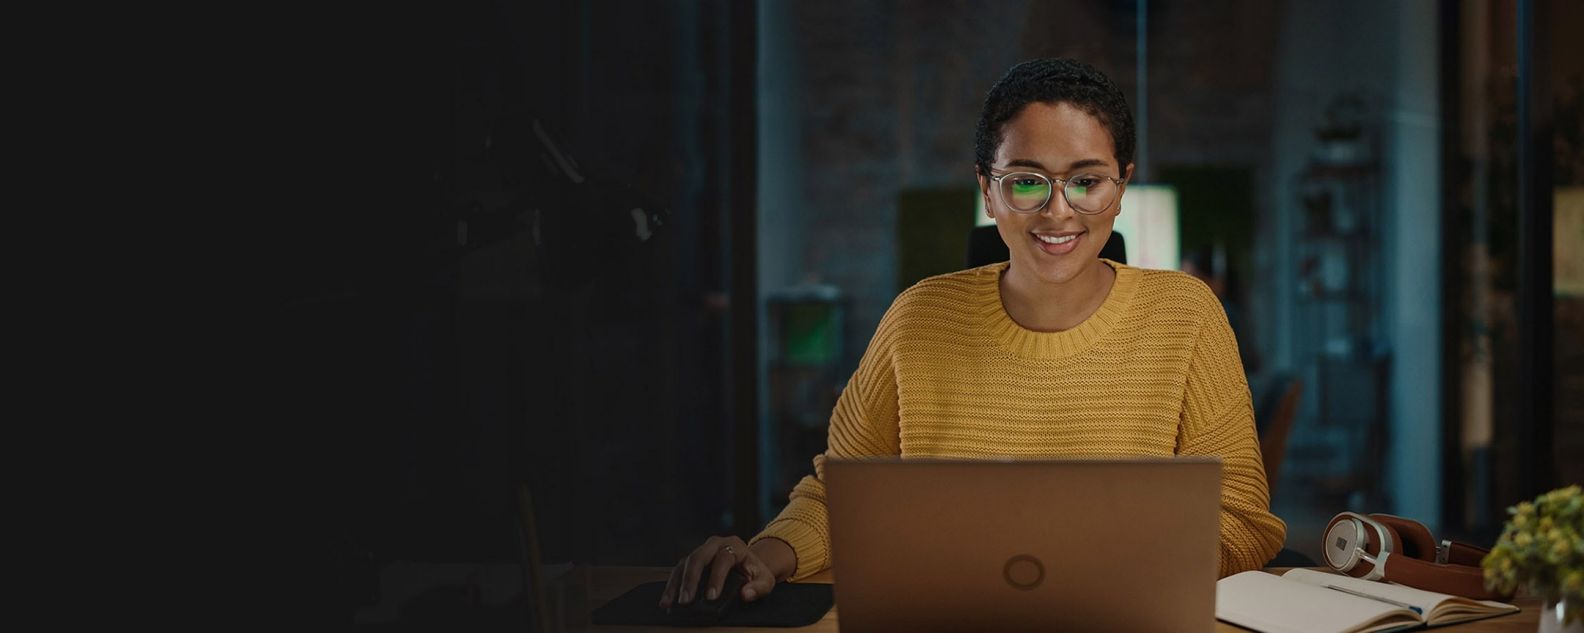 woman using a laptop and smiling